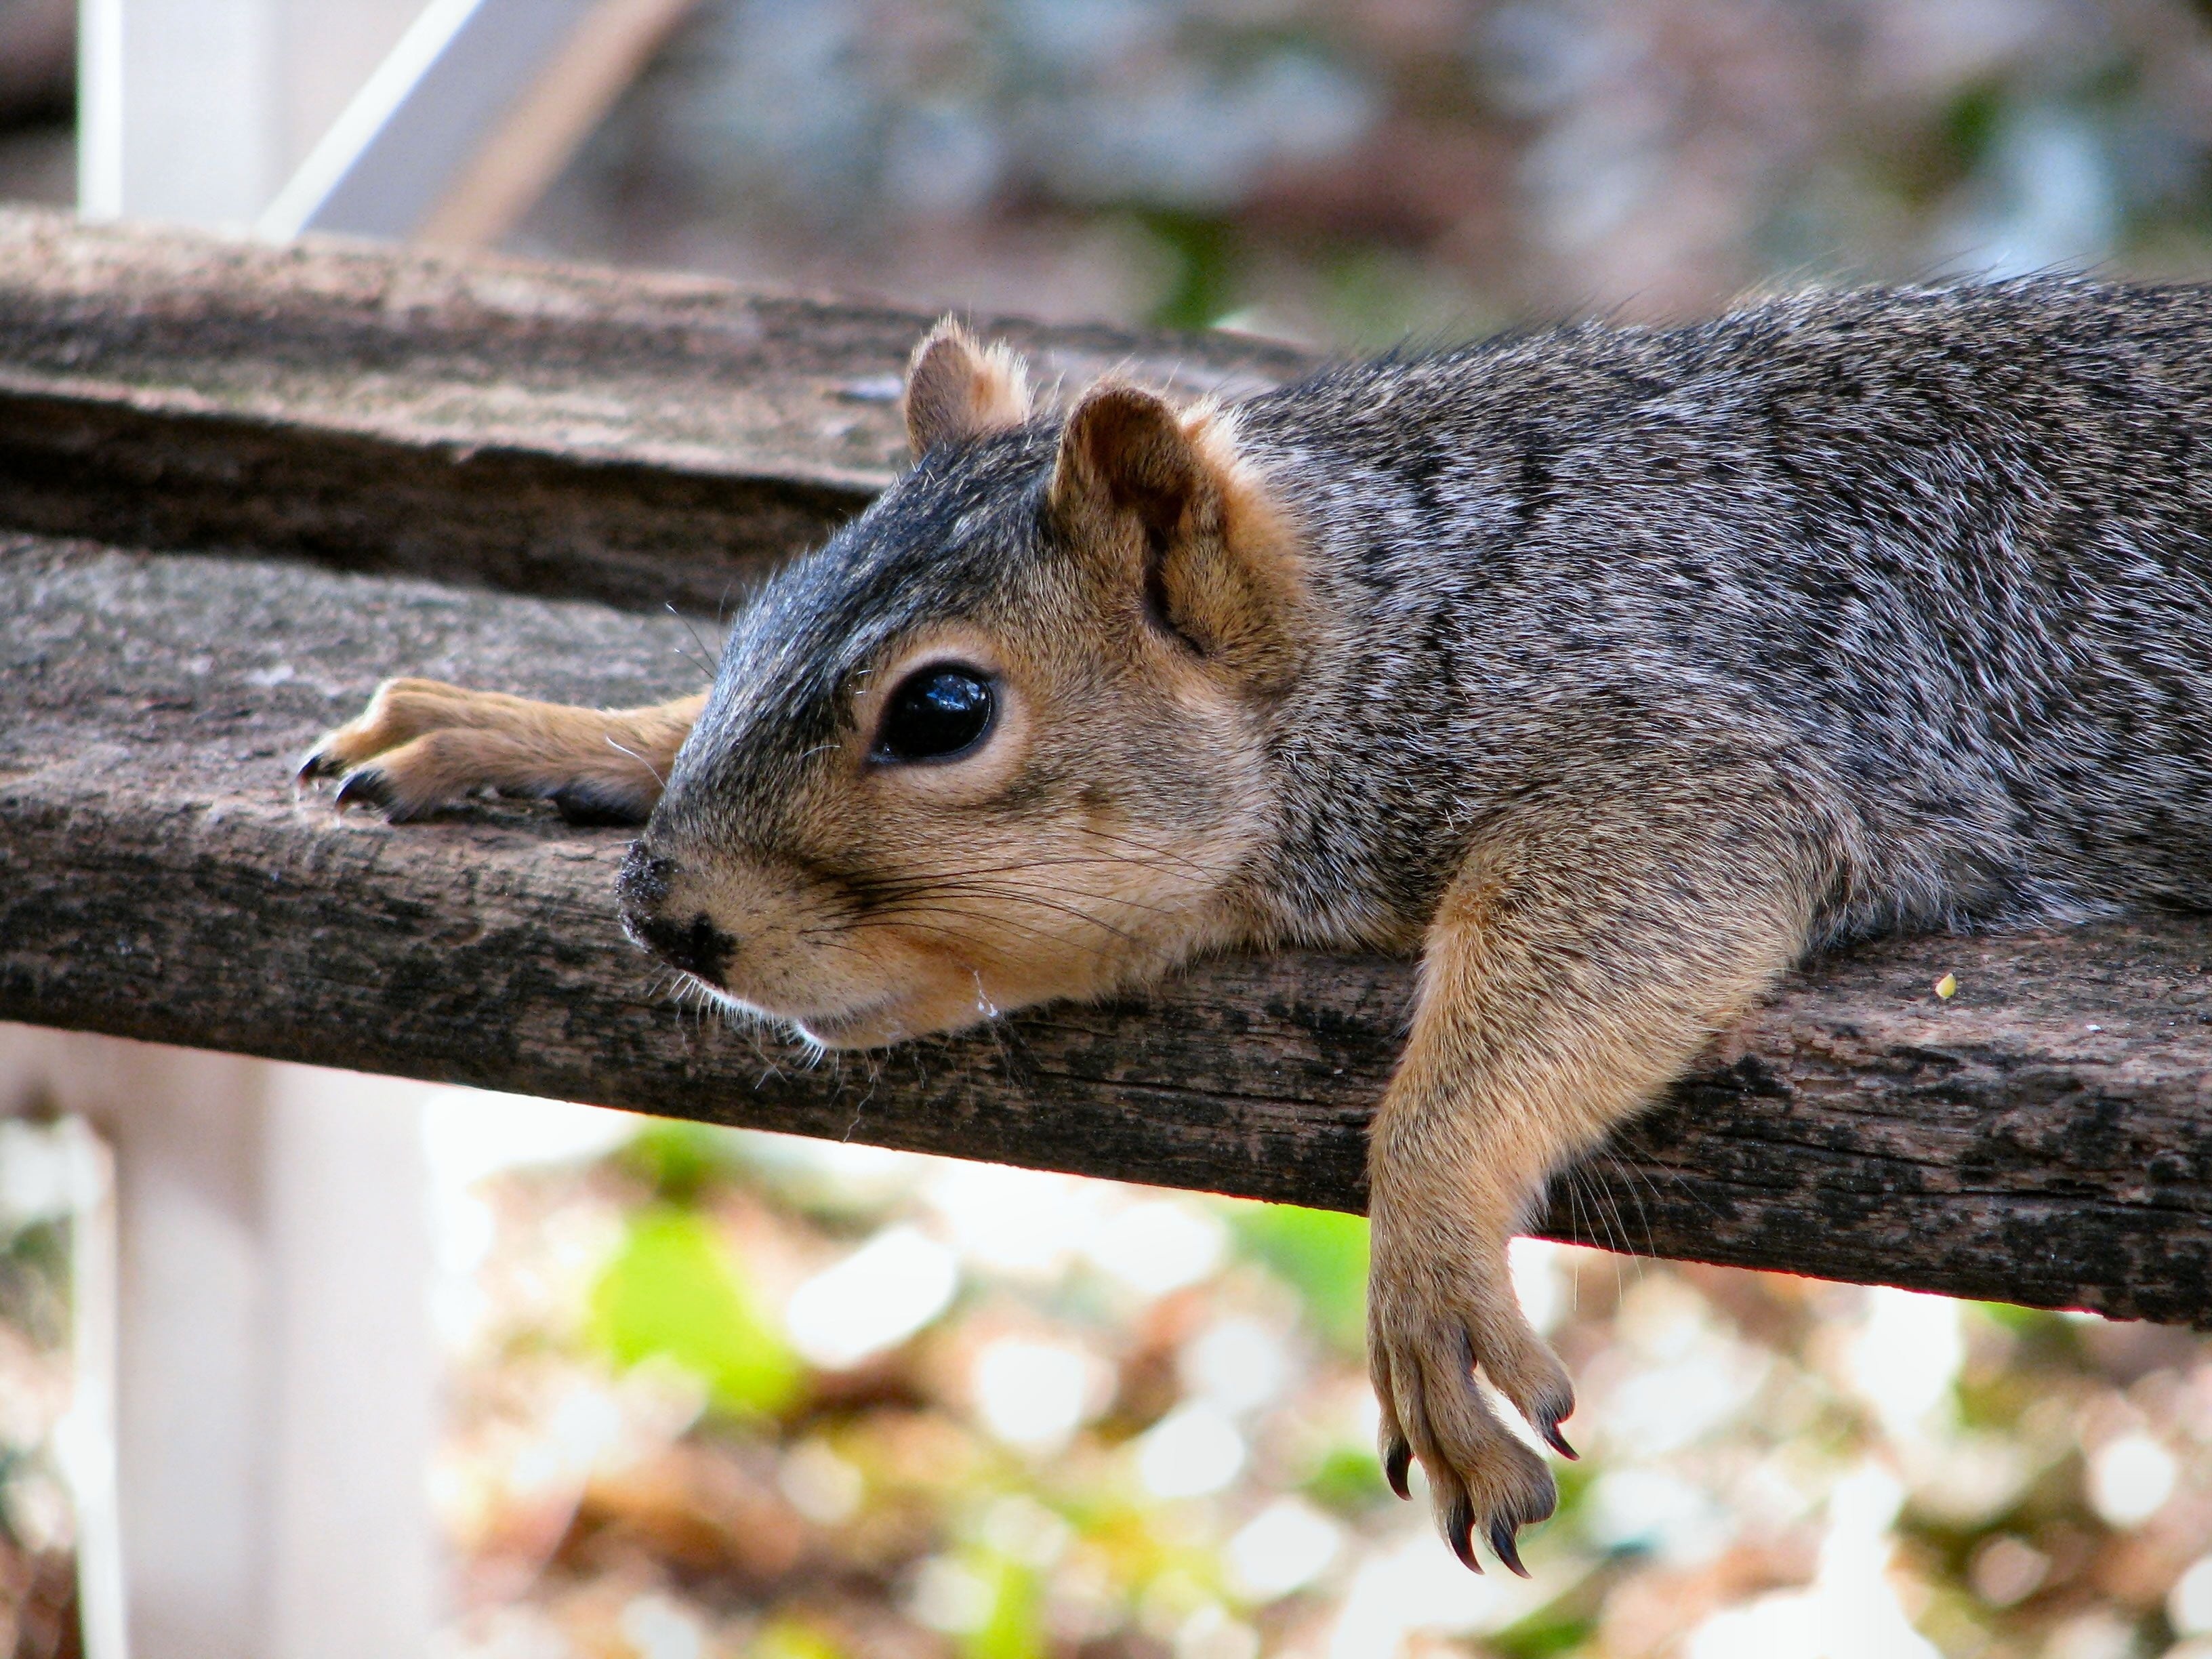 brown and gray squirrel, down, rest, animal, mammal, rodent, nature